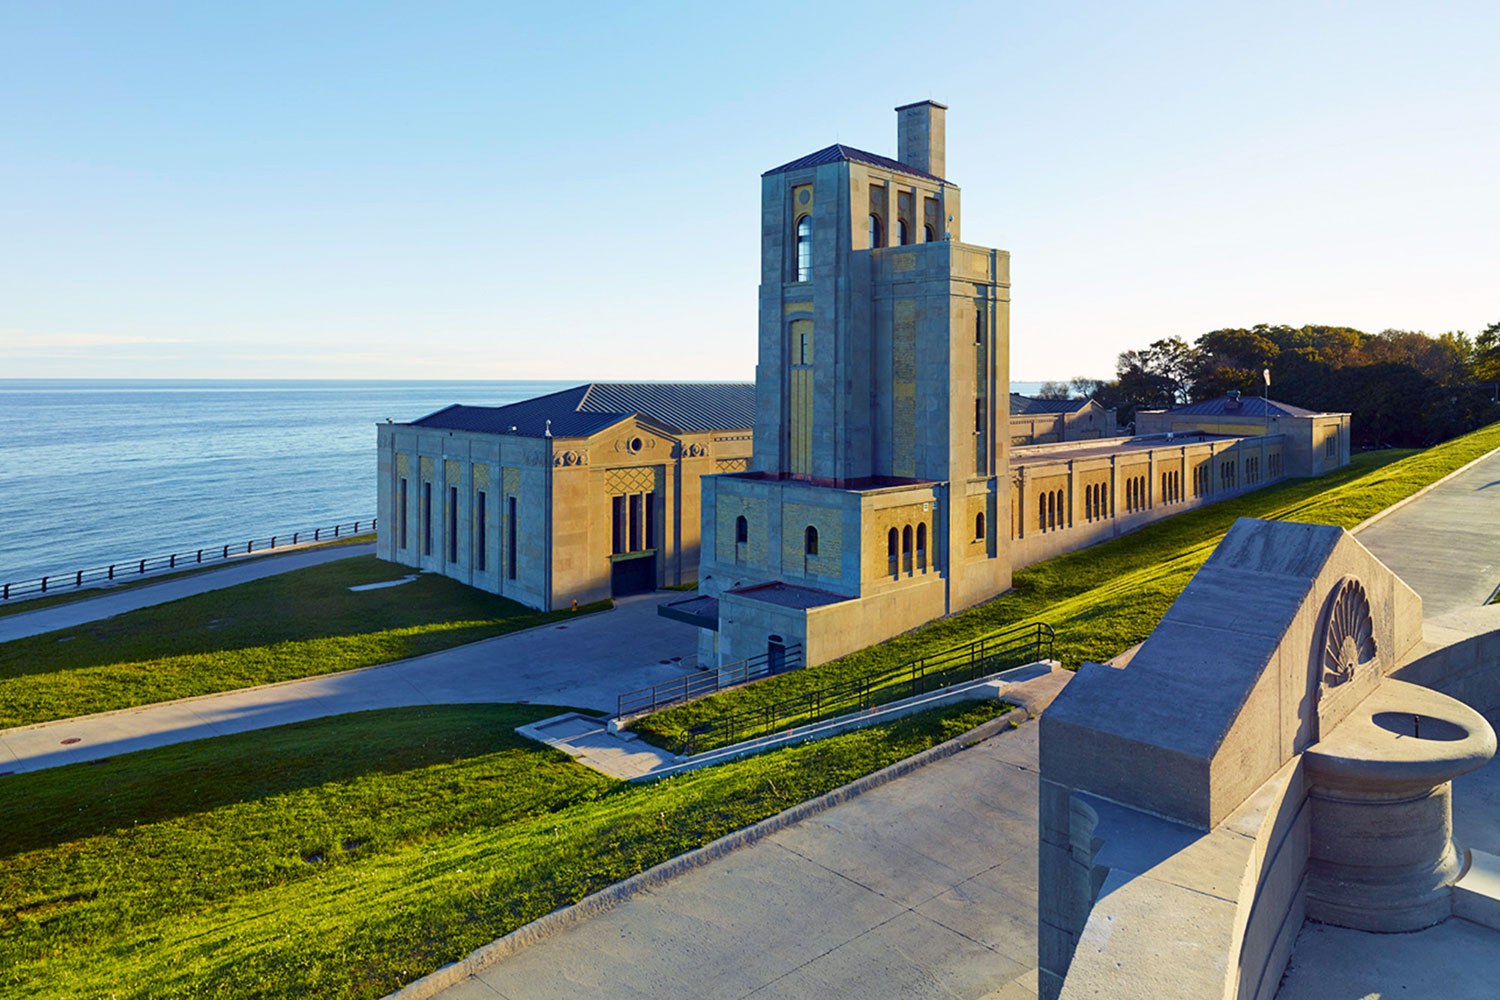 R.C. Harris Water Filtration Plant overlooking Lake Ontario (Photo courtesy of Taylor Hazell Architects)